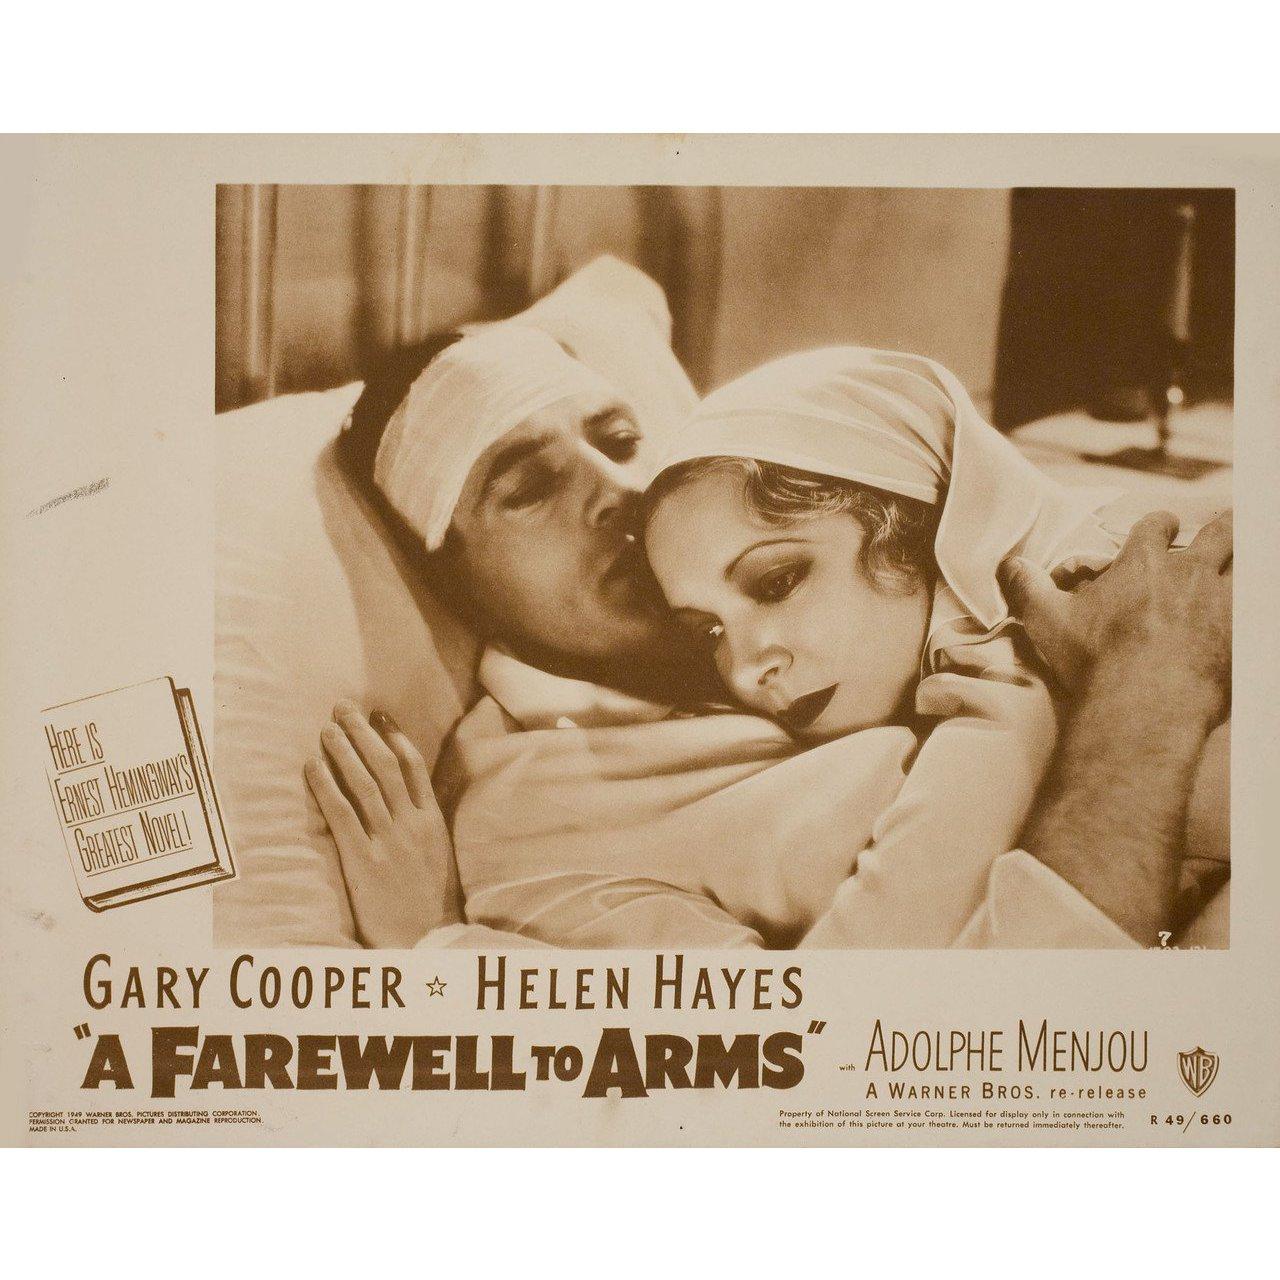 Original 1949 re-release U.S. scene card for the 1932 film A Farewell to Arms directed by Frank Borzage with Helen Hayes / Gary Cooper / Adolphe Menjou / Mary Philips. Very good-fine condition. Please note: the size is stated in inches and the